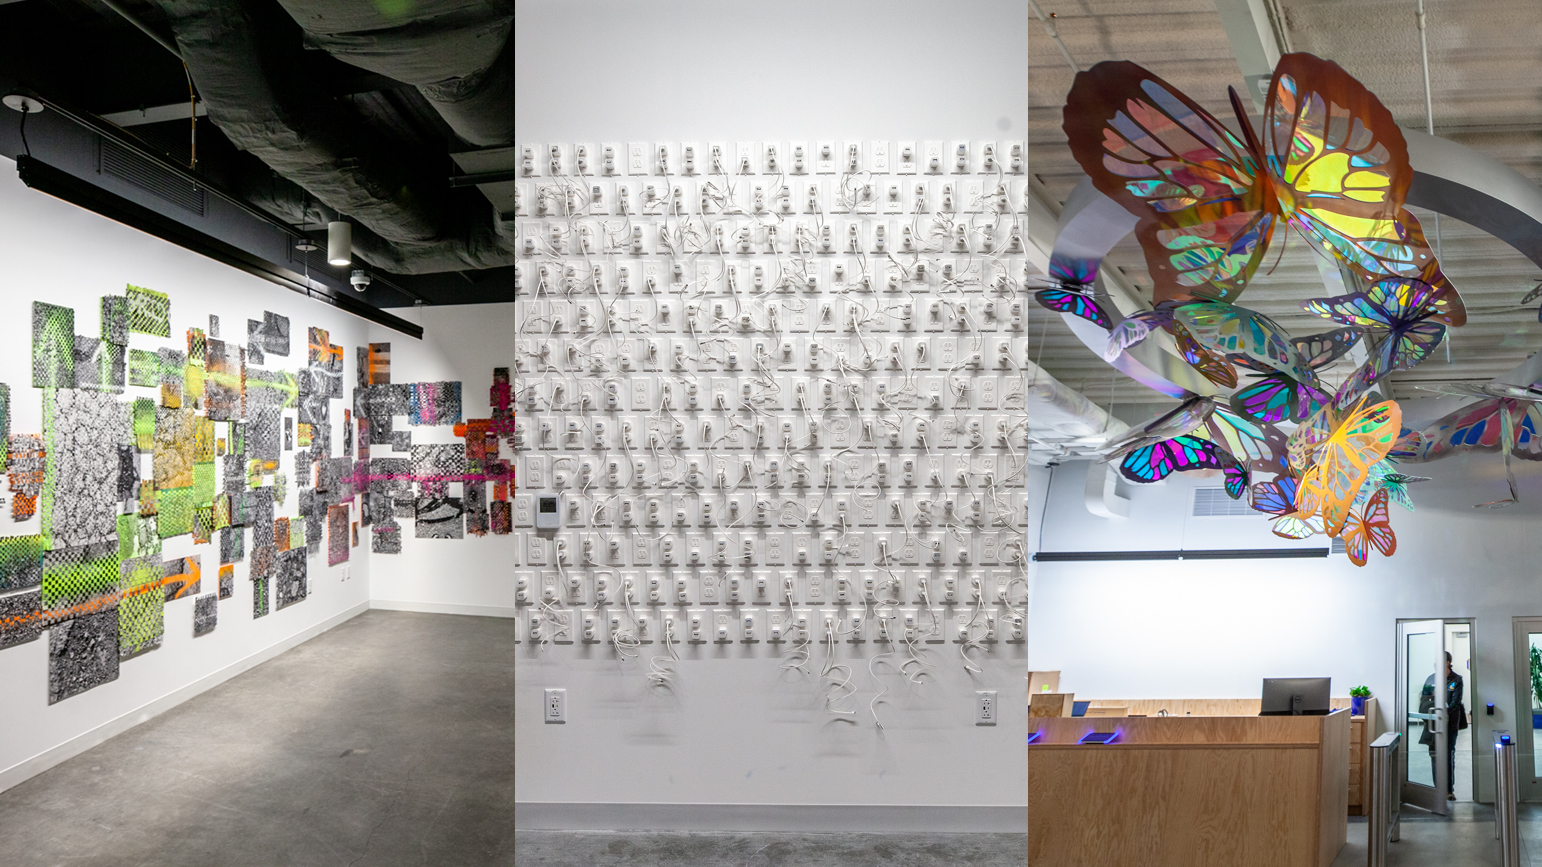 Three installations at Facebook in Pittsburgh: abstracted photographs of pavement, iPhone chargers made of paper, and iridescent butterflies